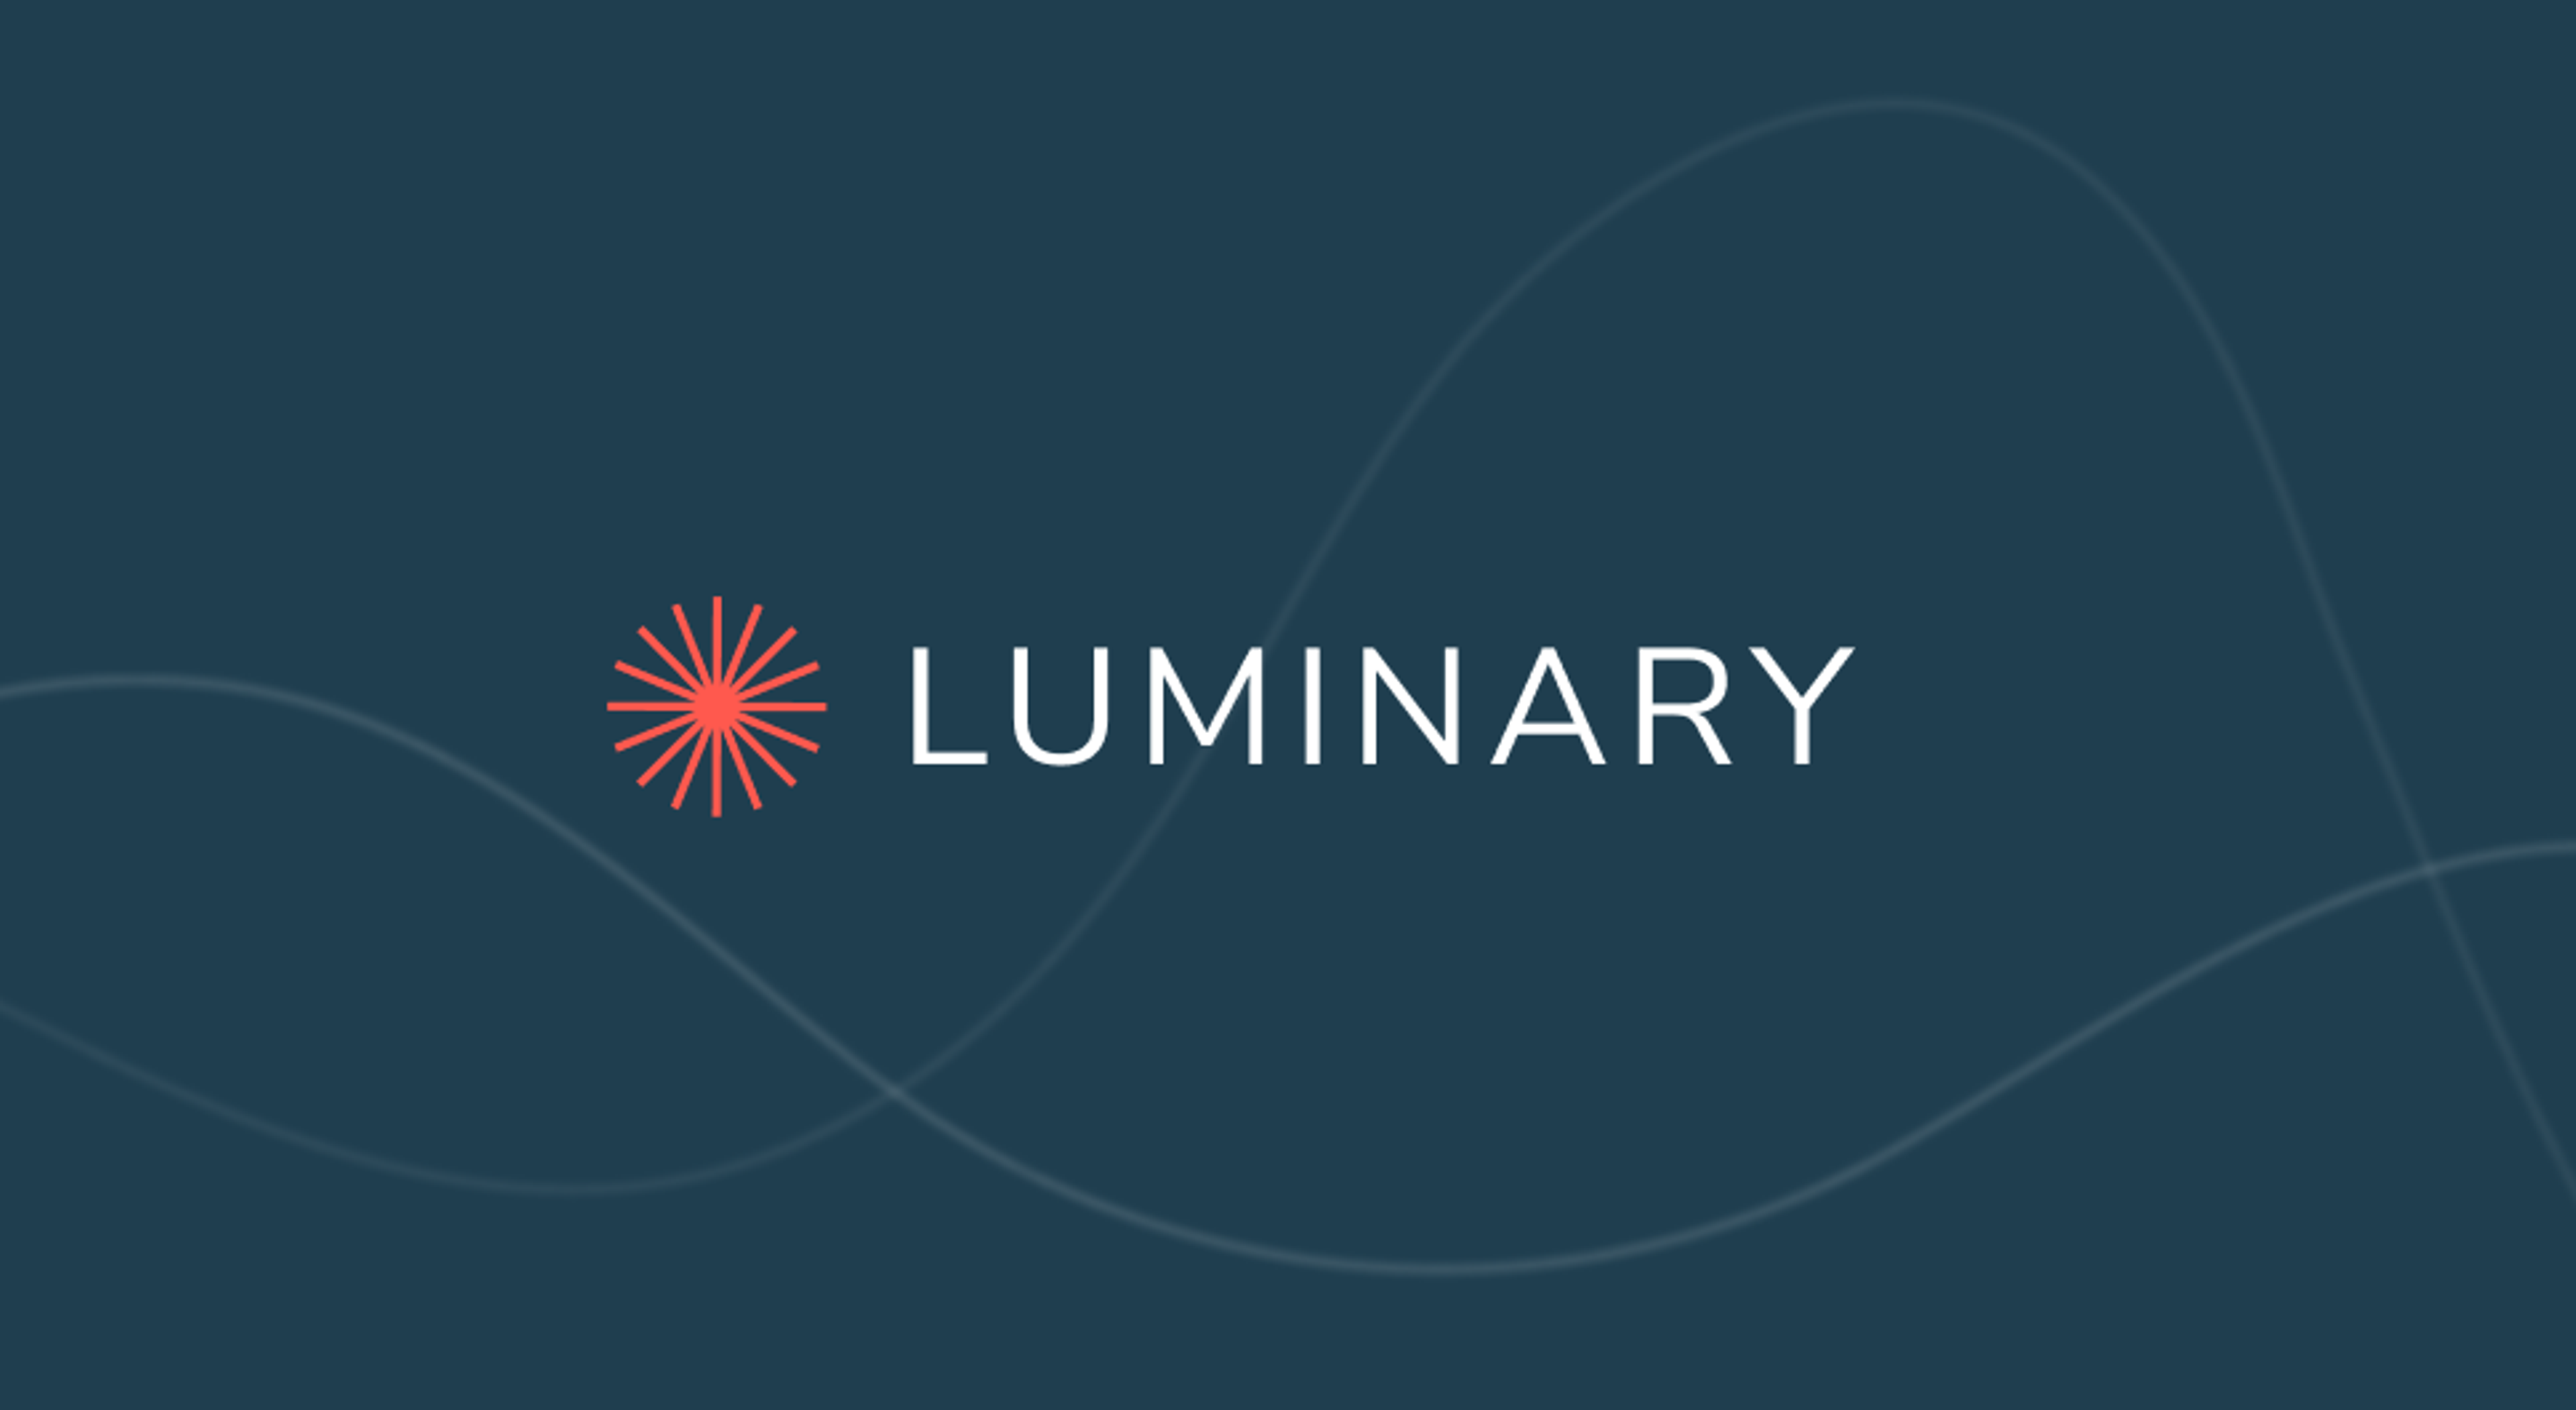 Luminary Announces Closing of Convertible Note and Rudy Adolf as Board Advisor